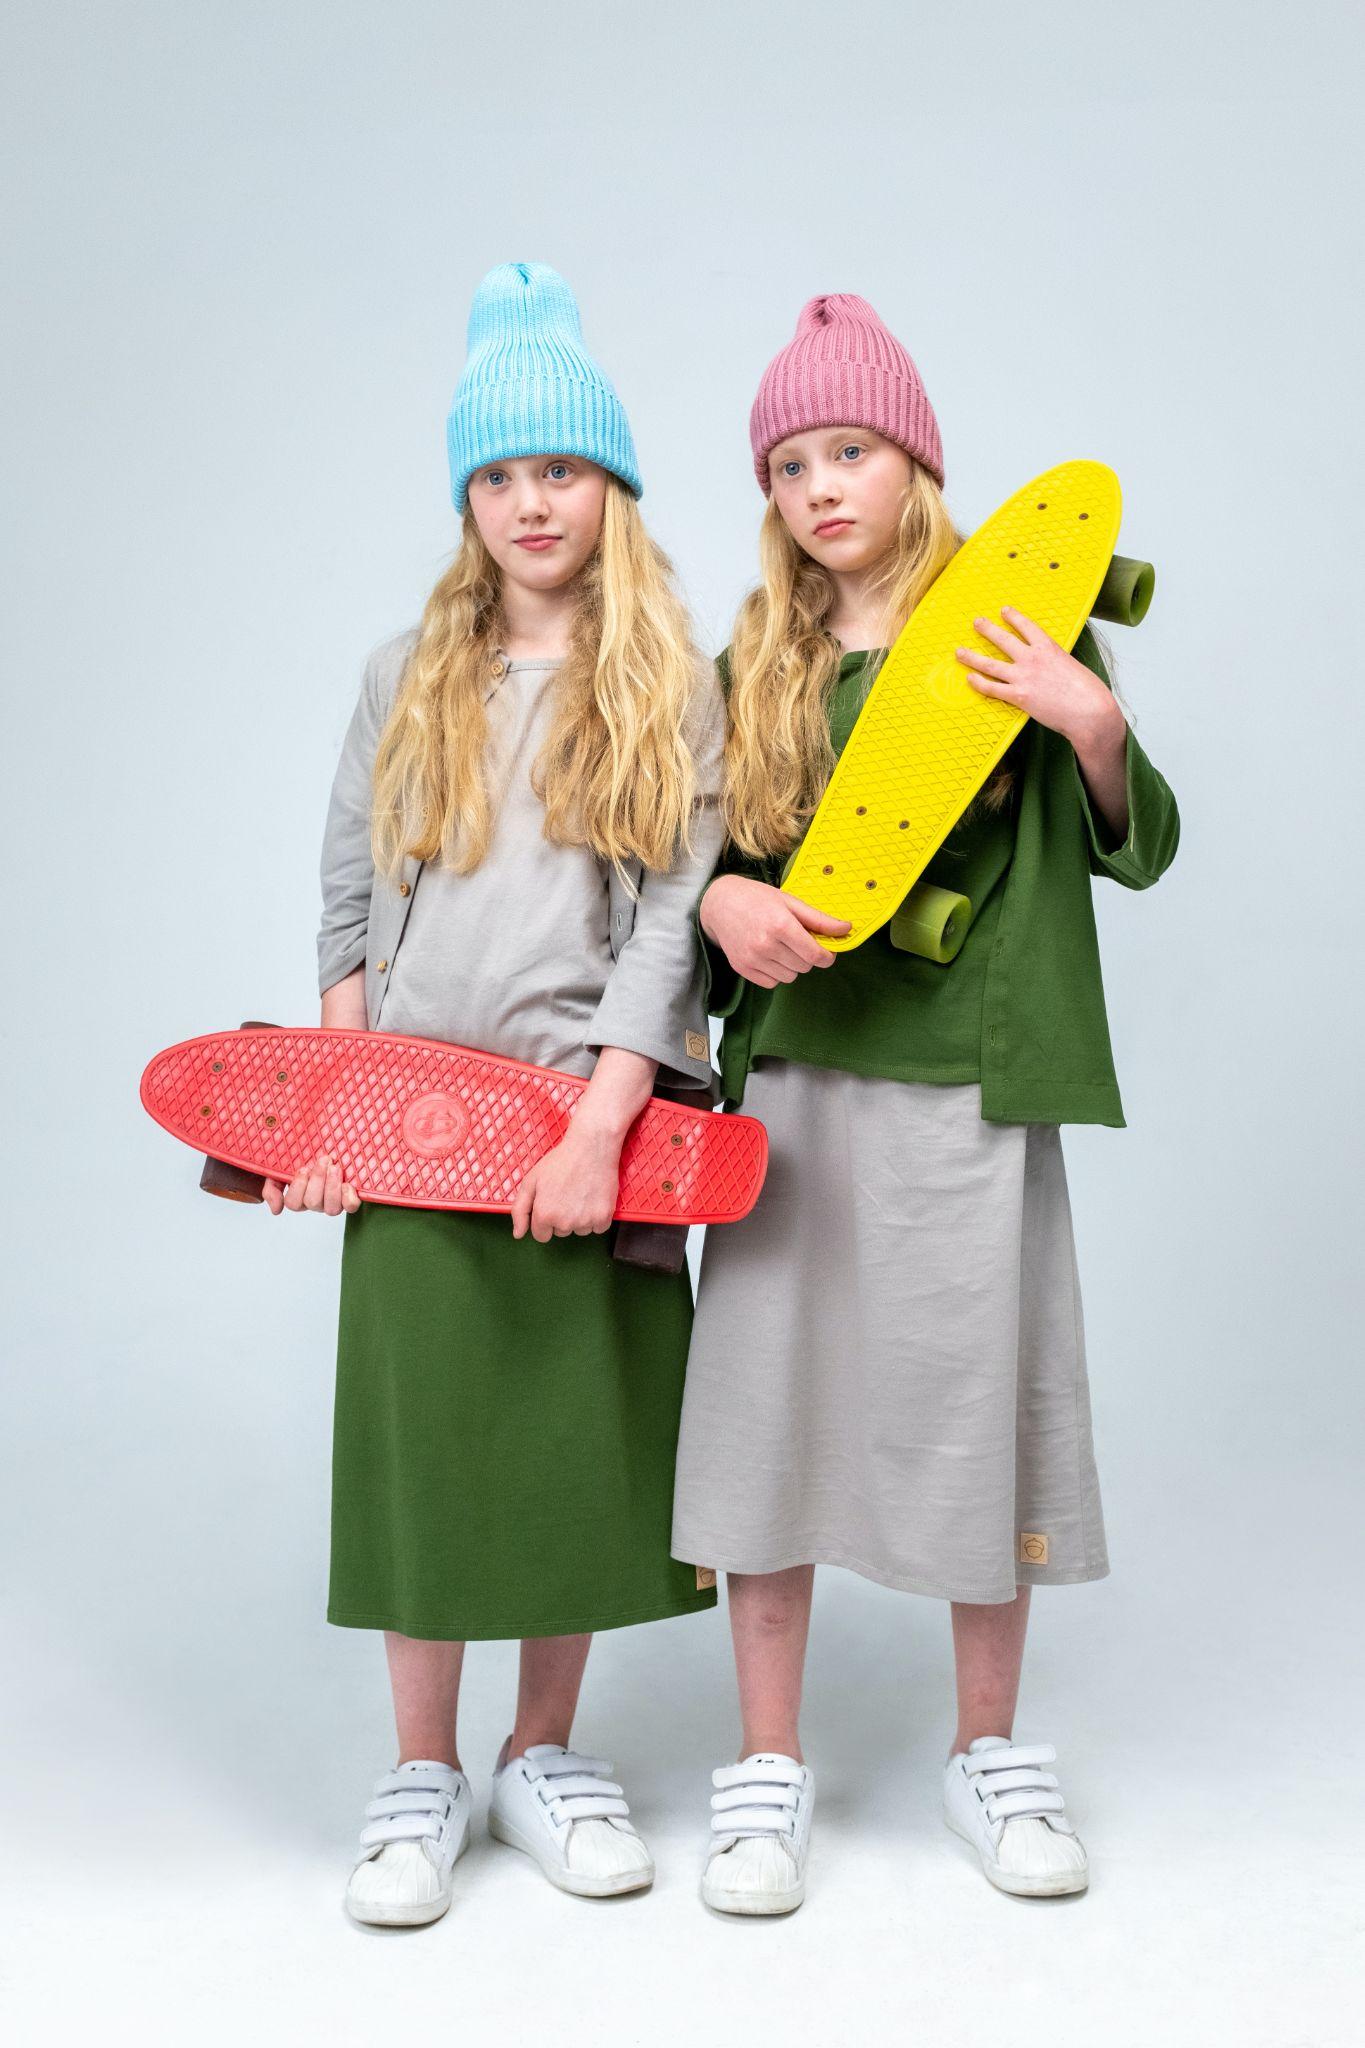 Two girls, identical twins, who are both carrying skateboards and wearing knitted caps.